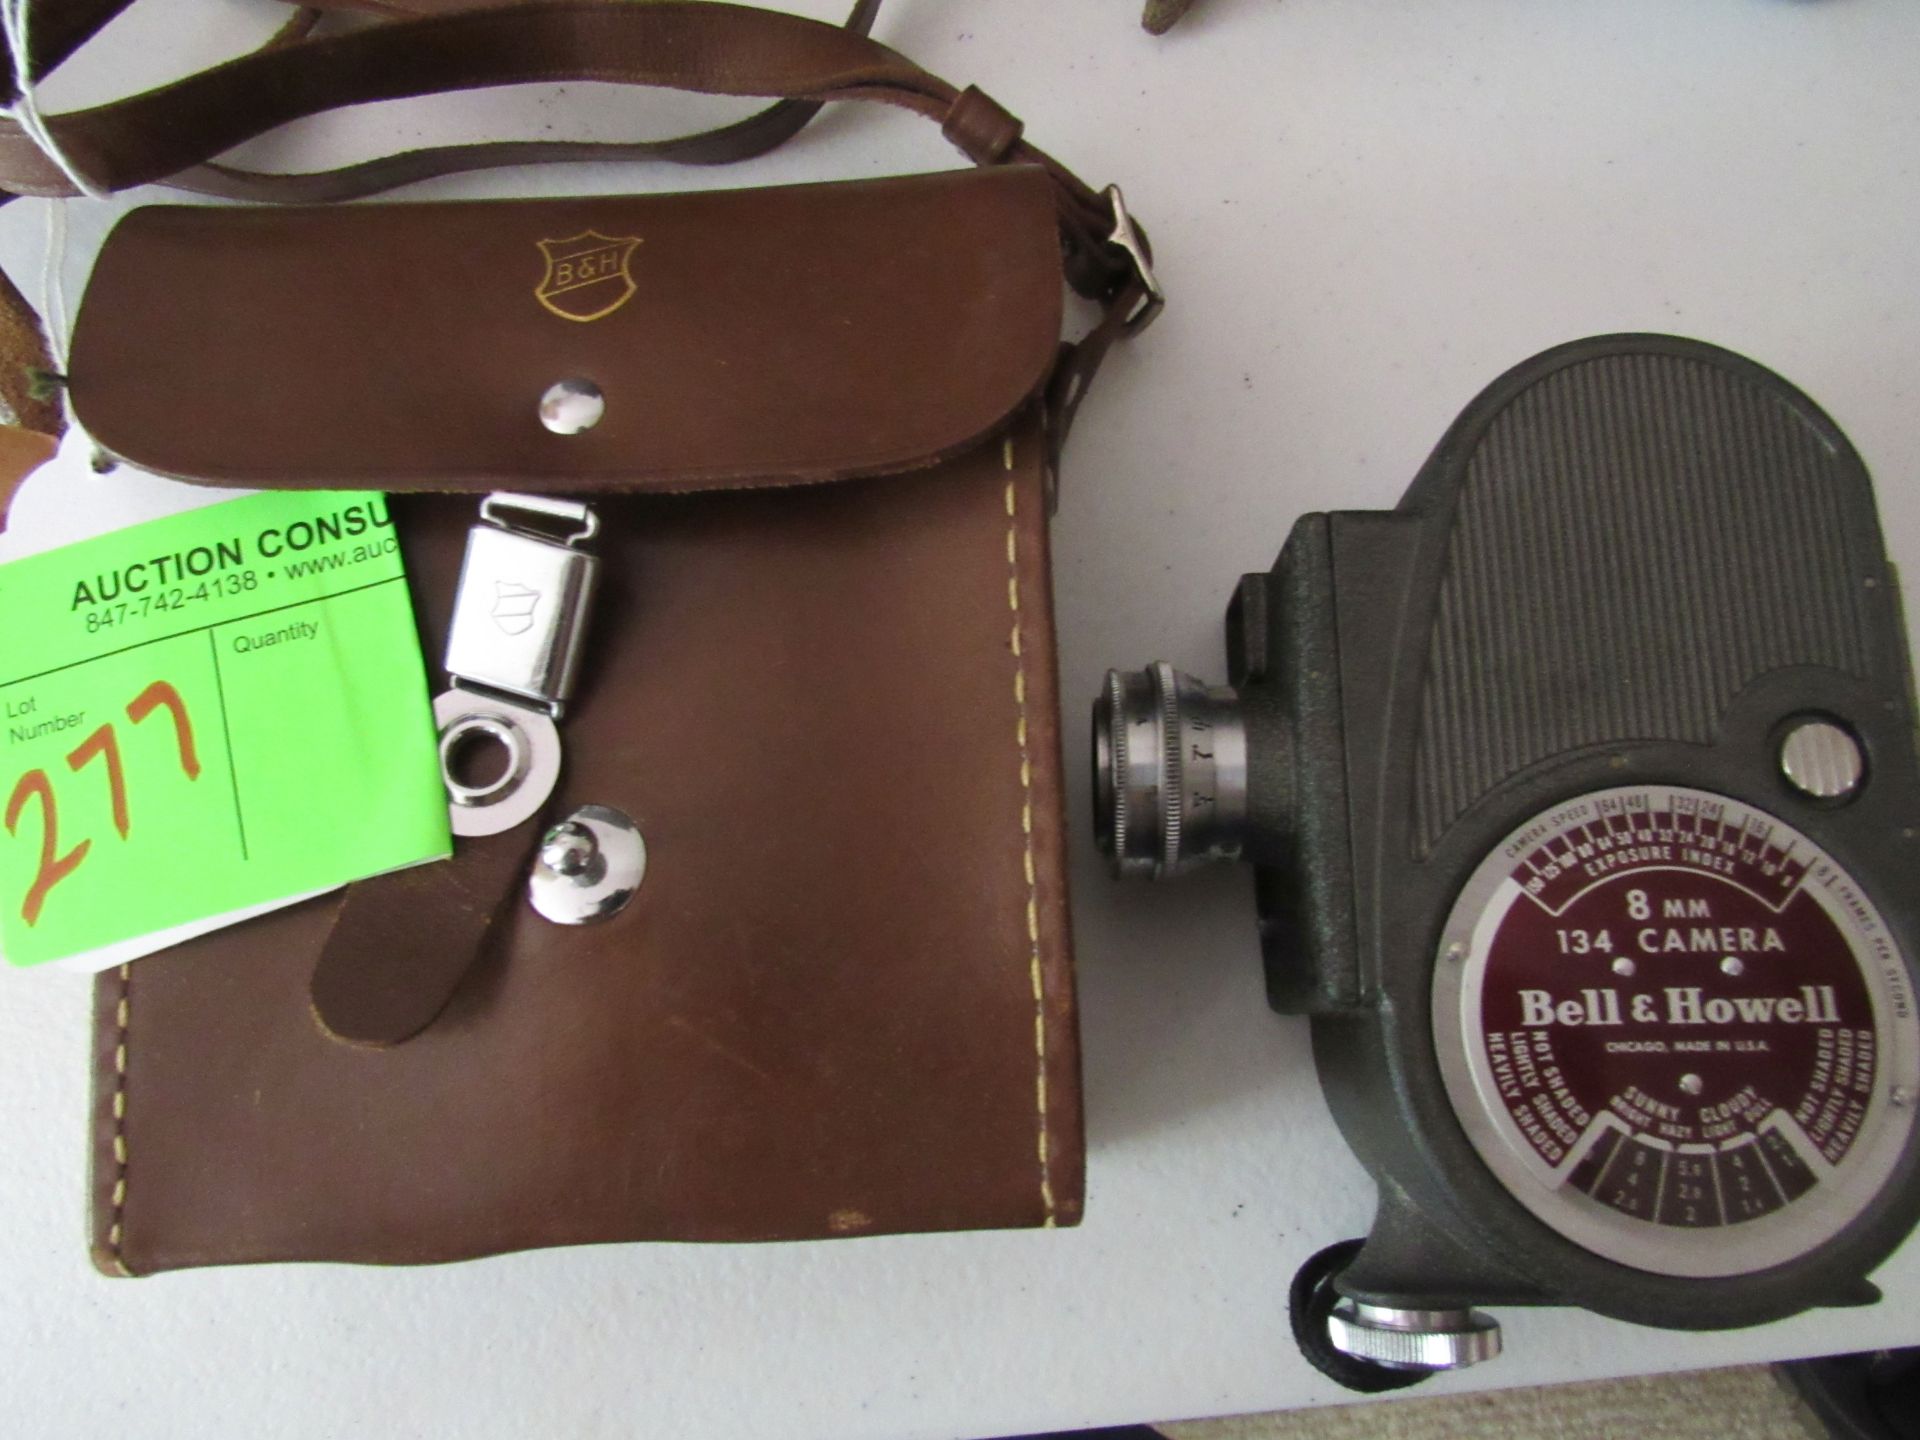 Bell & Howell 8mm 134 camera with leather case